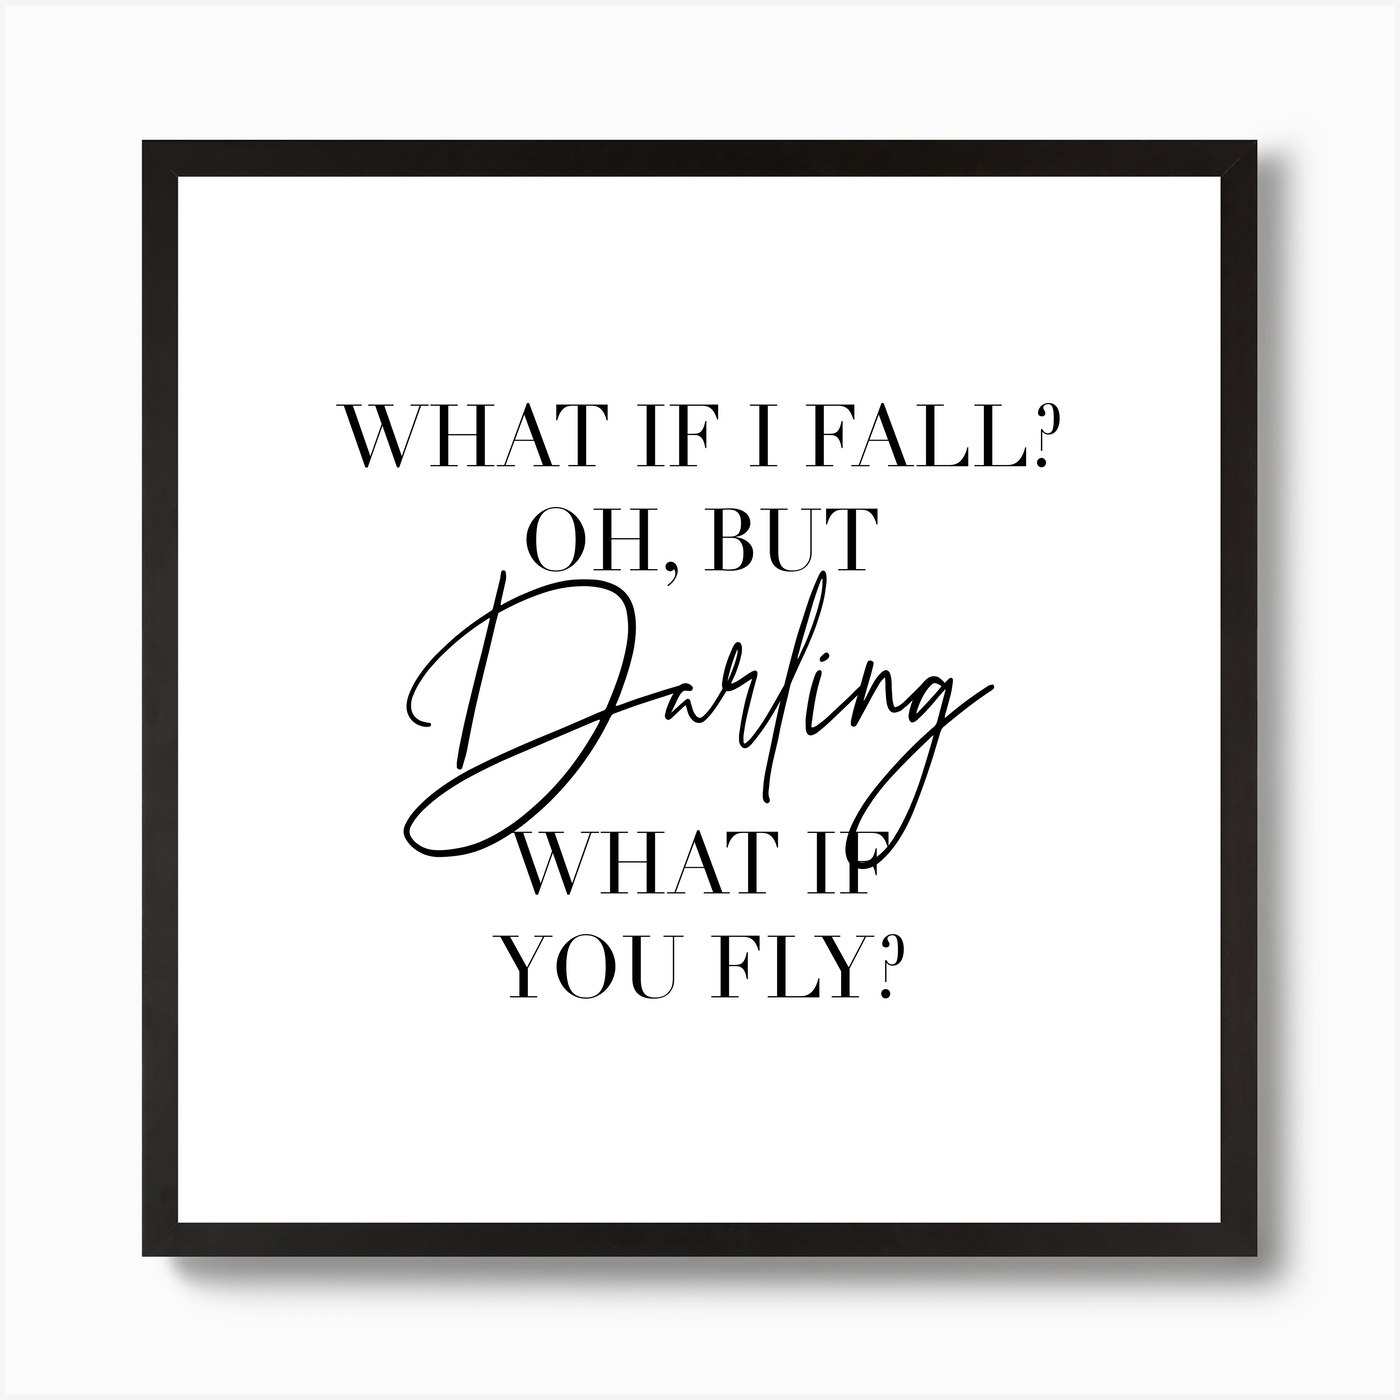 What If I Fall Oh But Darling What If You Fly Art Print By Typologie Paper Co Fy